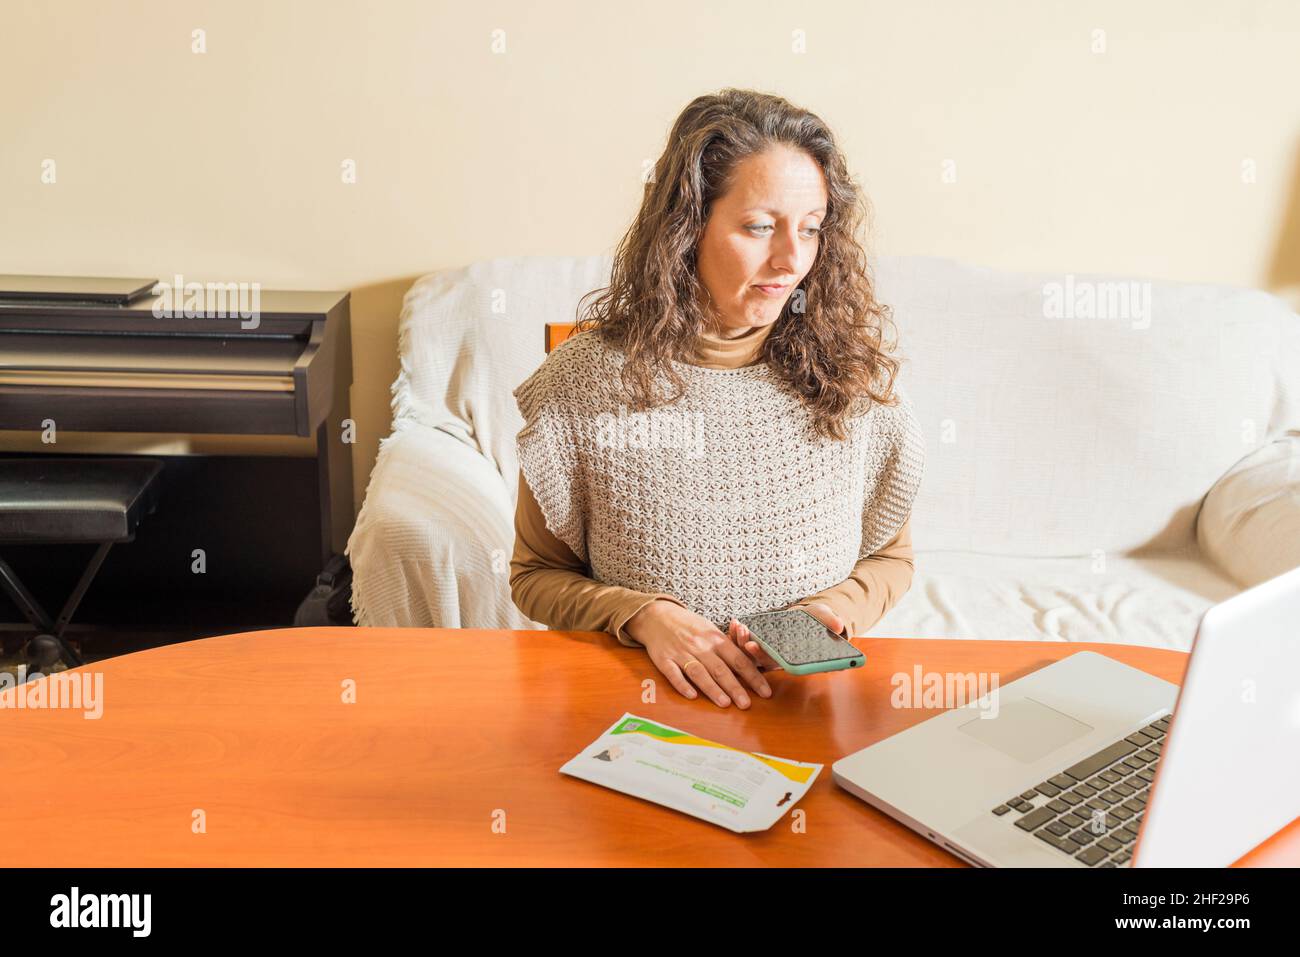 A woman with a smartphone and in front of a laptop looking up information about Covid19 antigen self-tests on the internet. Stock Photo